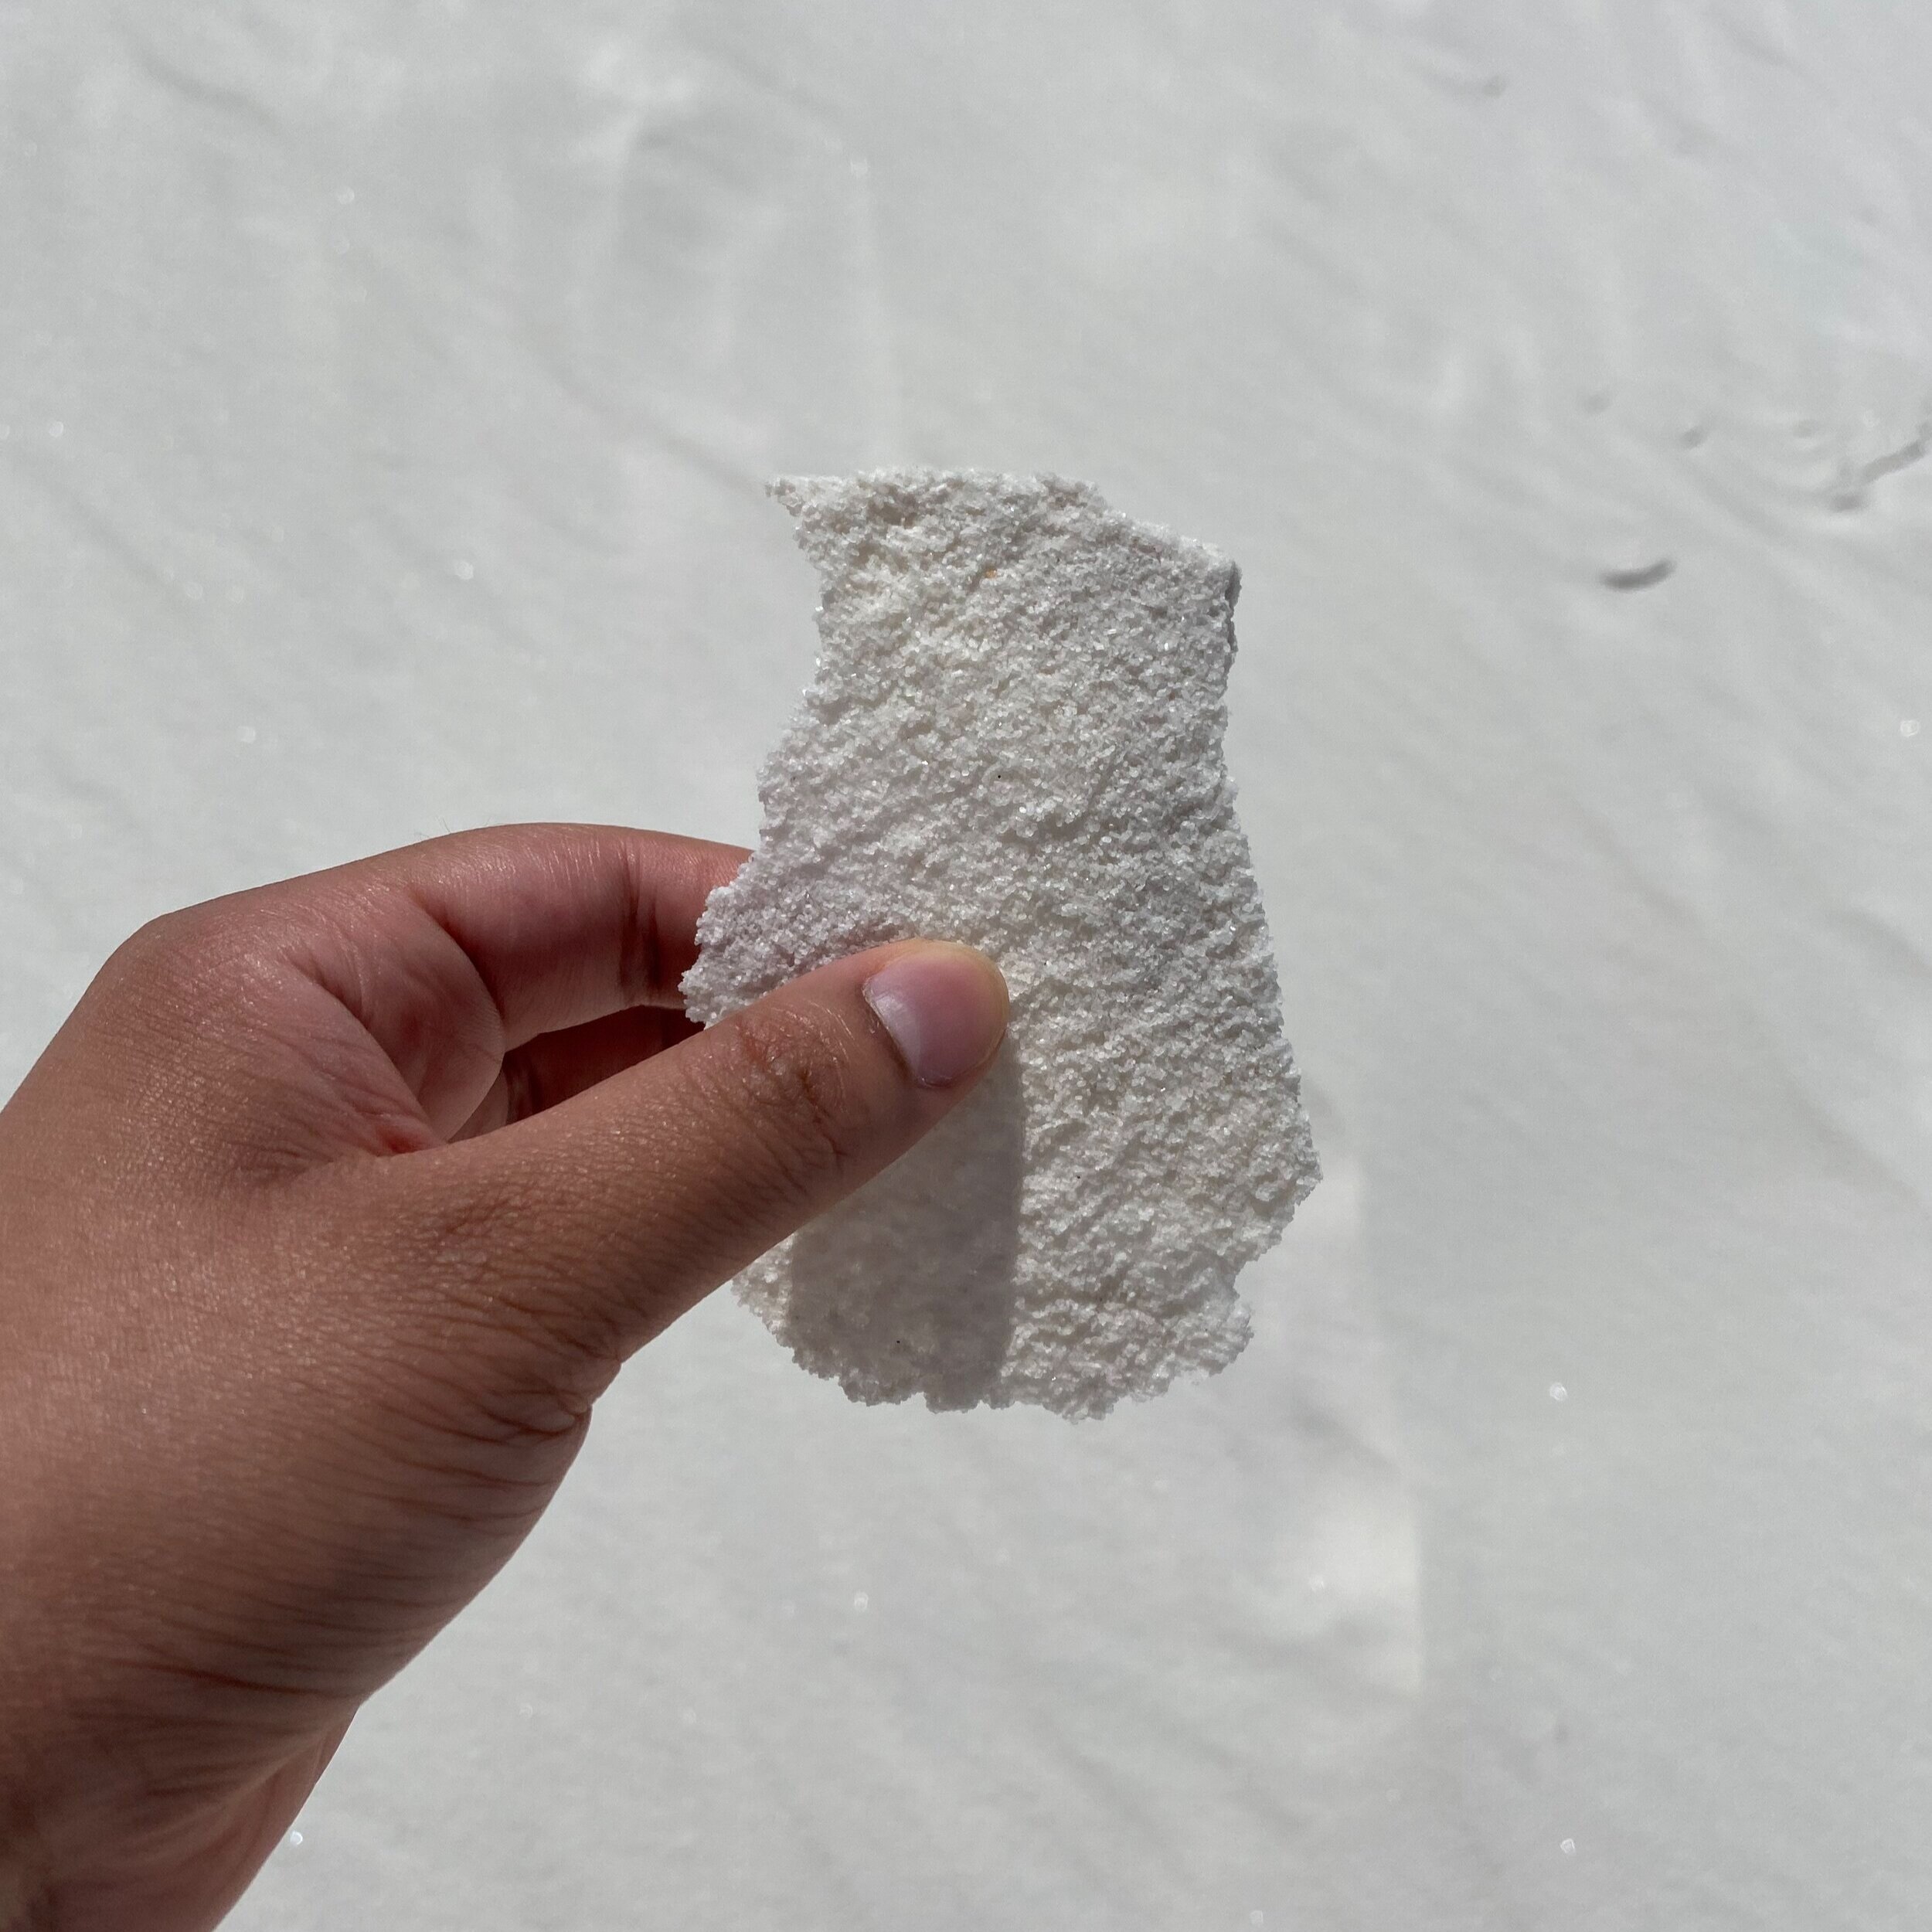 A hand holding up a piece of hardened white gypsum sand in New Mexico